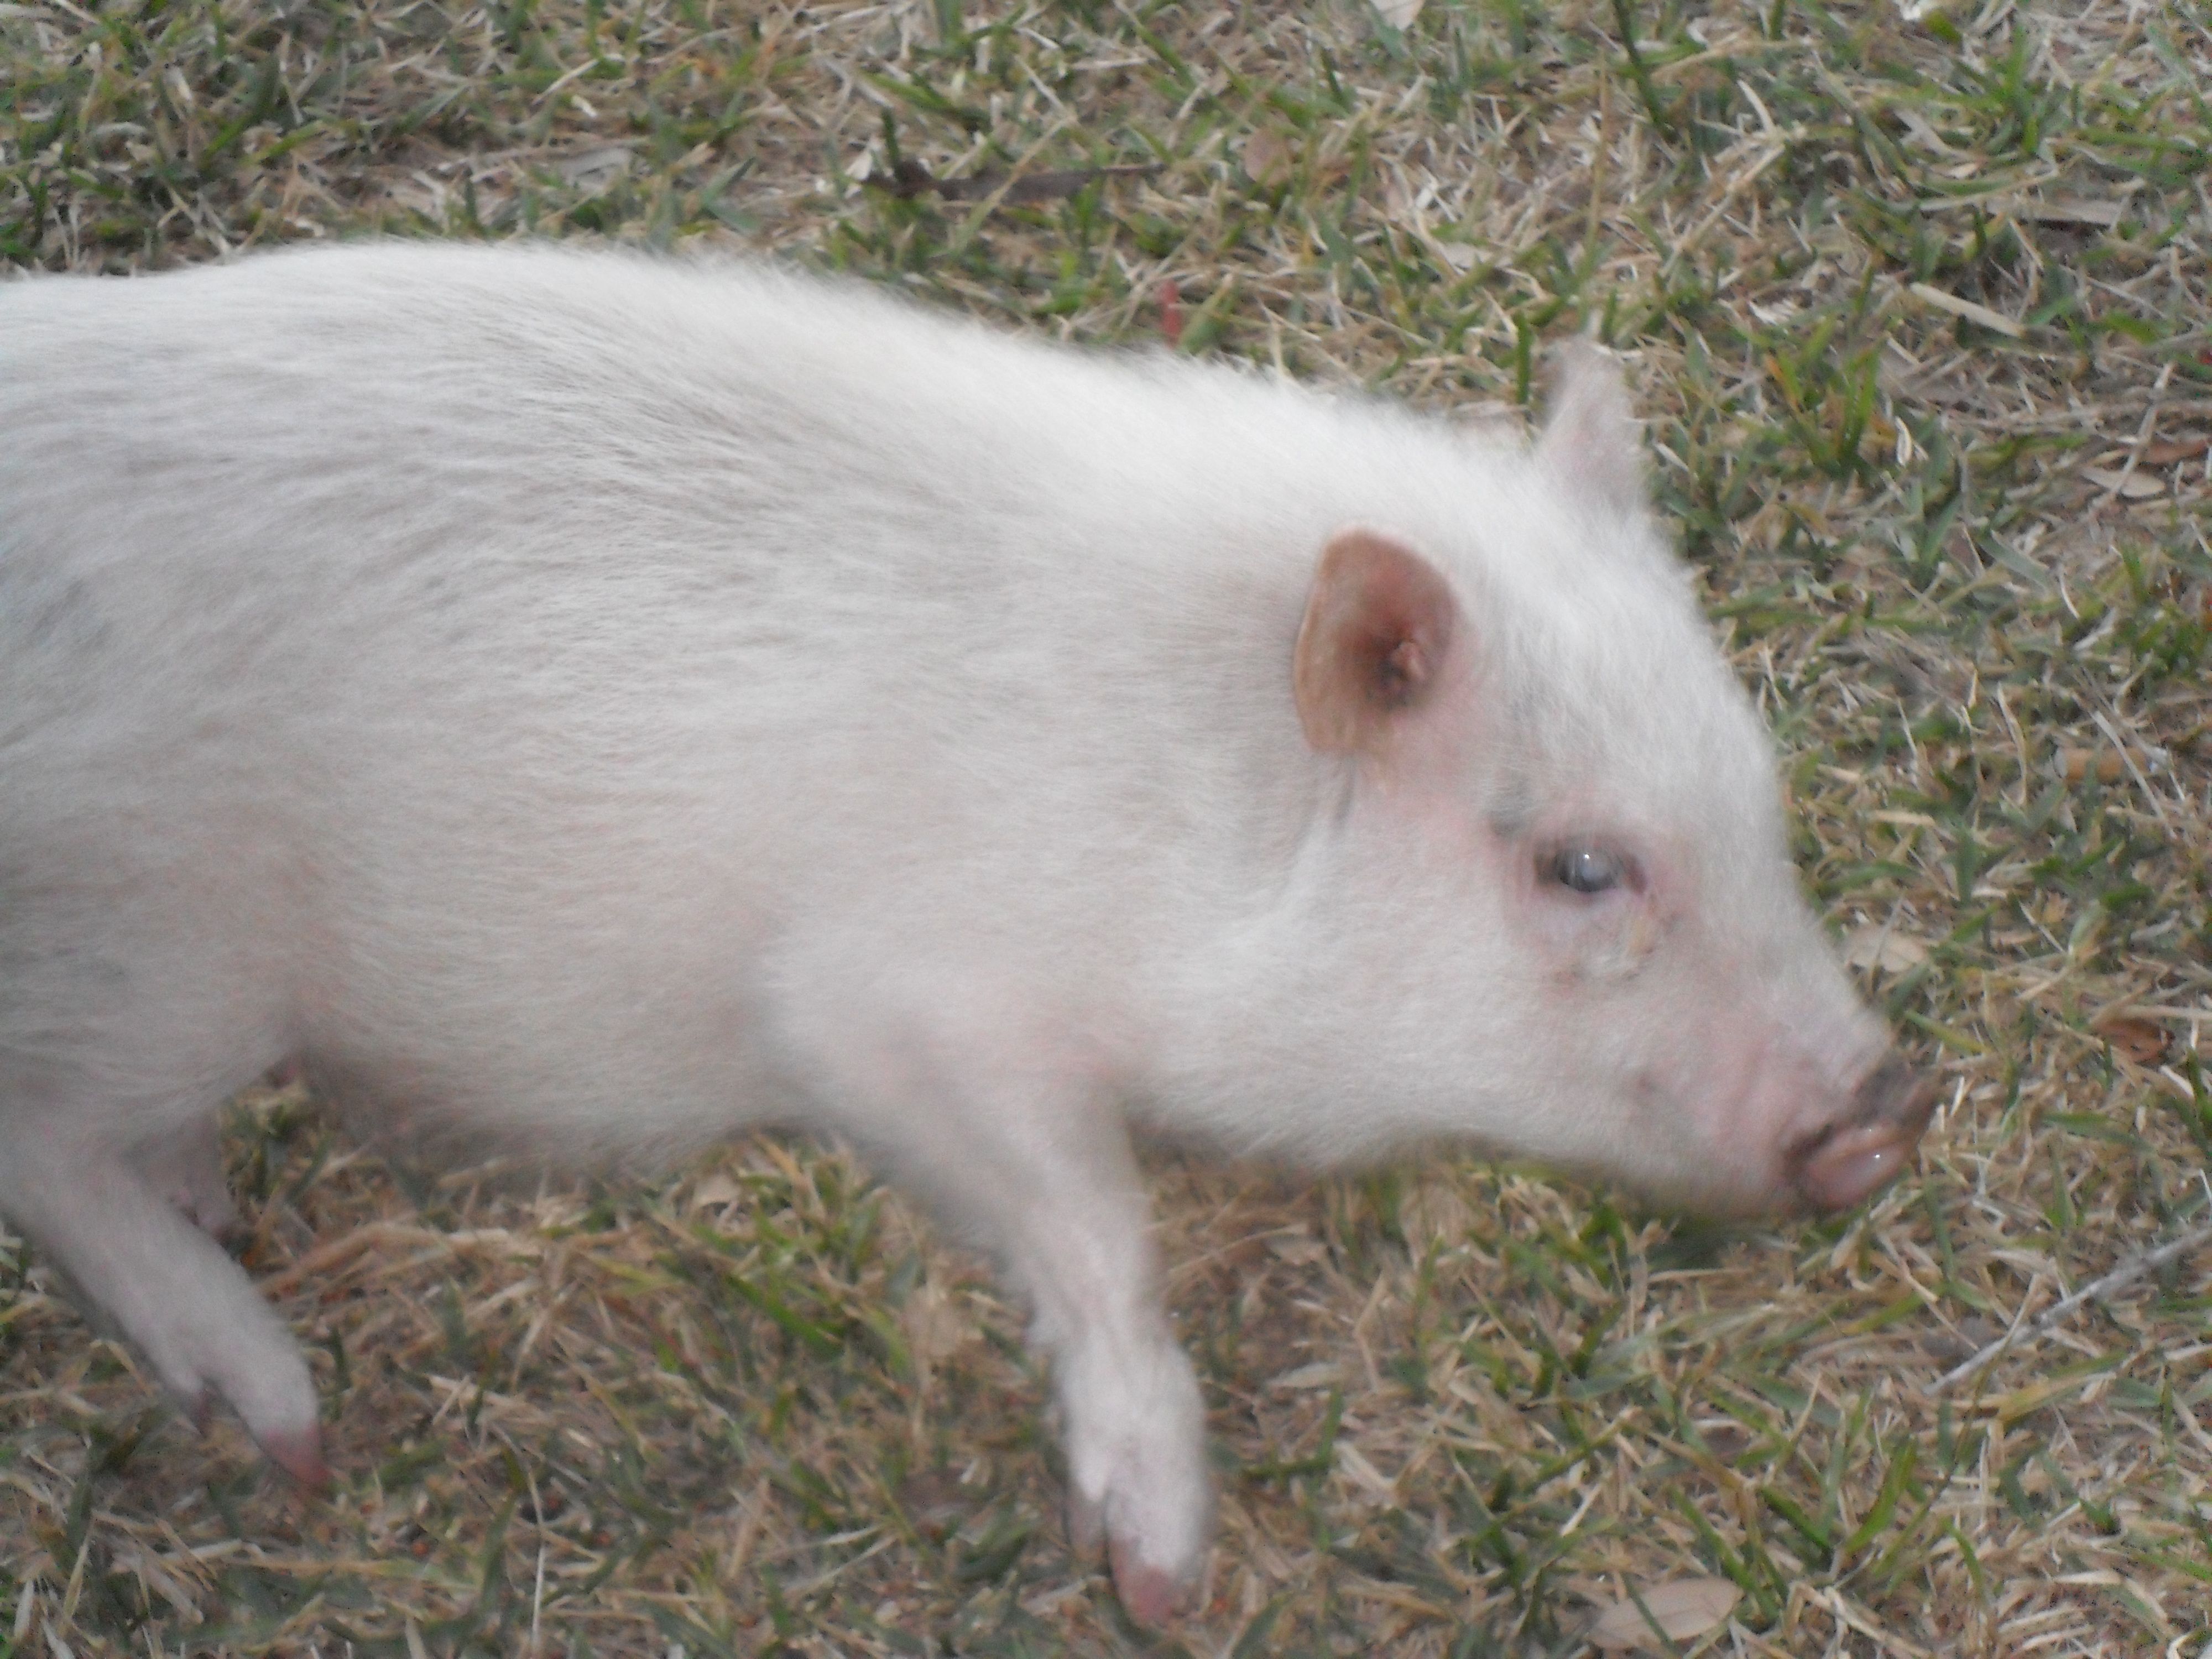 yes, this lil piggy wandered through my yard one afternoon... i guess he was lost